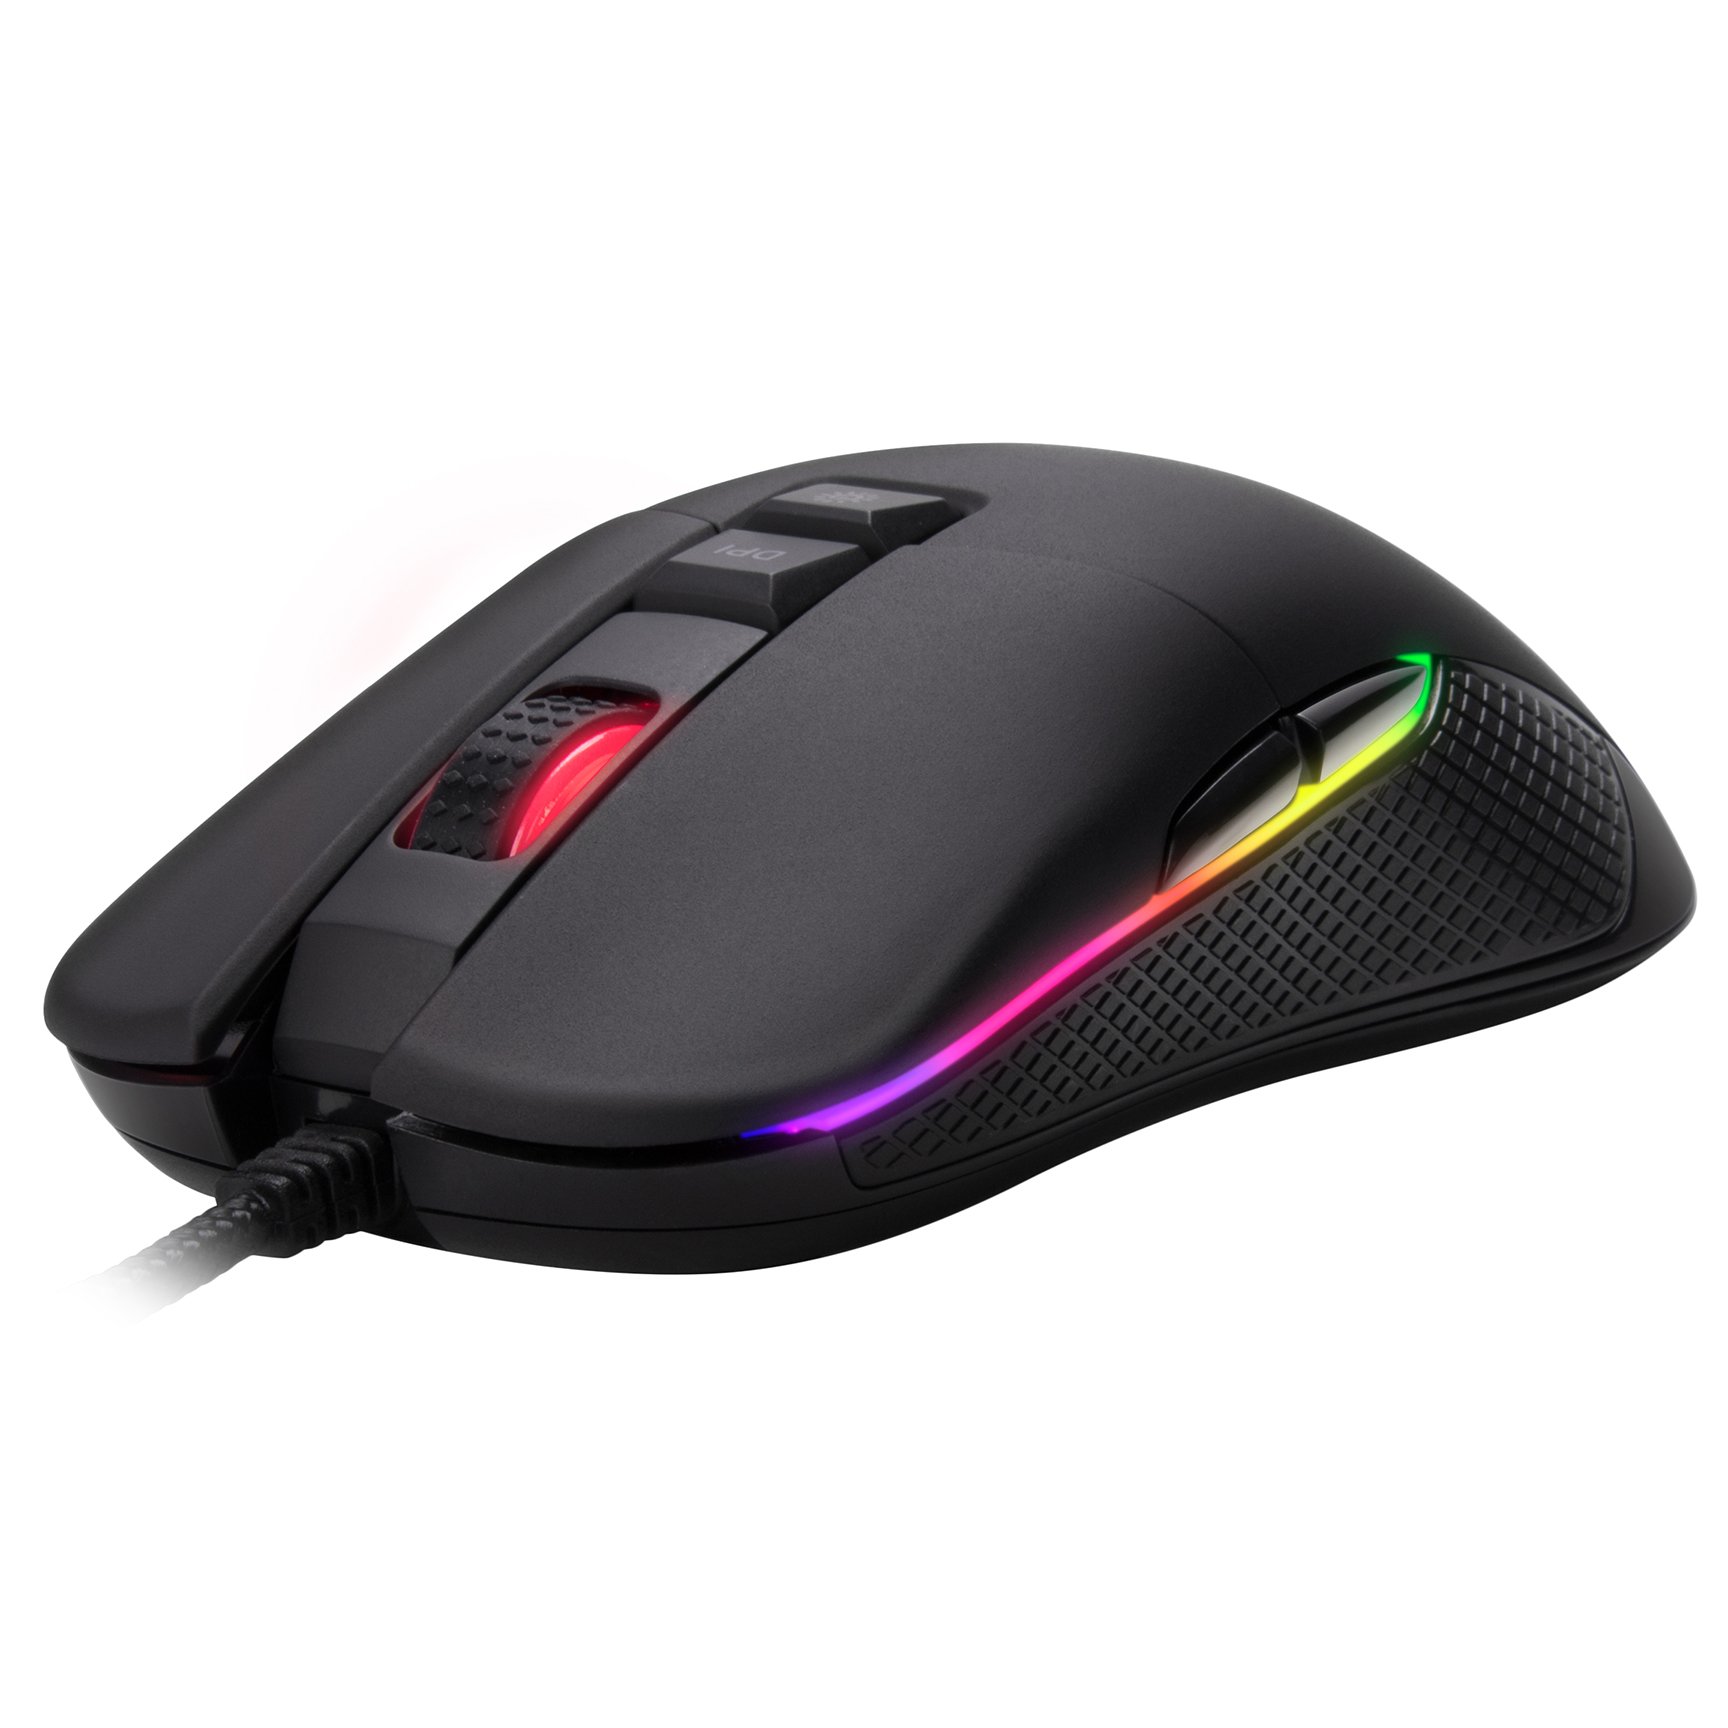 Rosewill RGB Gaming Mouse with Ambidextrous Grip for Computer/PC/Laptop/Mac Book with 10000 DPI Optical Gaming Sensor and Comfortable Ergonomic Design w/9 Buttons (NEON M62)